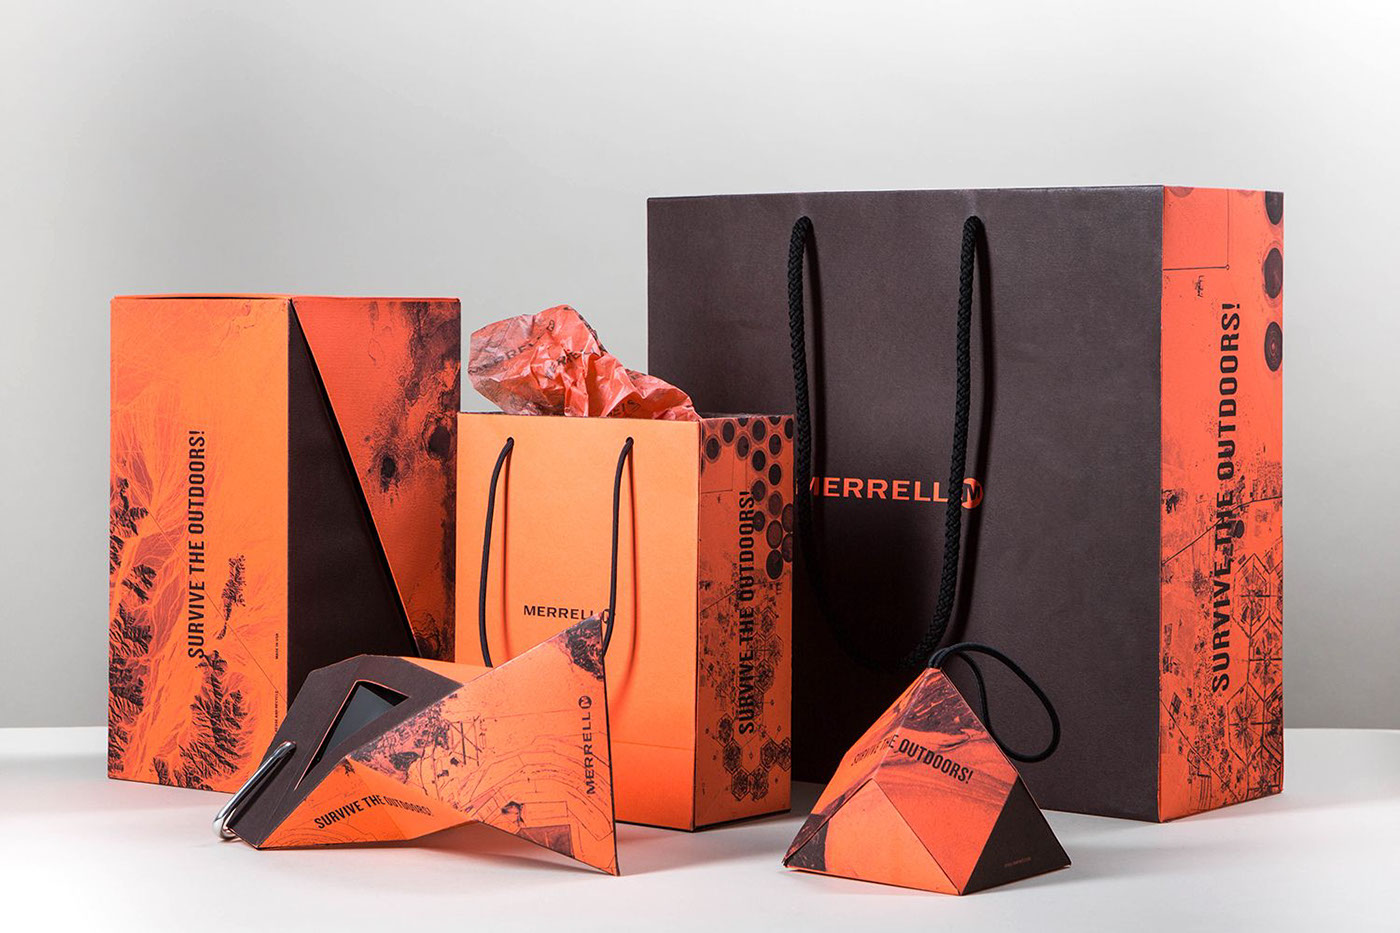 merrell geometry tshirt packaging pyramid raw Outdoor adventure Shoe packaging shoebox orange rough In-store Packaging topographic maps textures